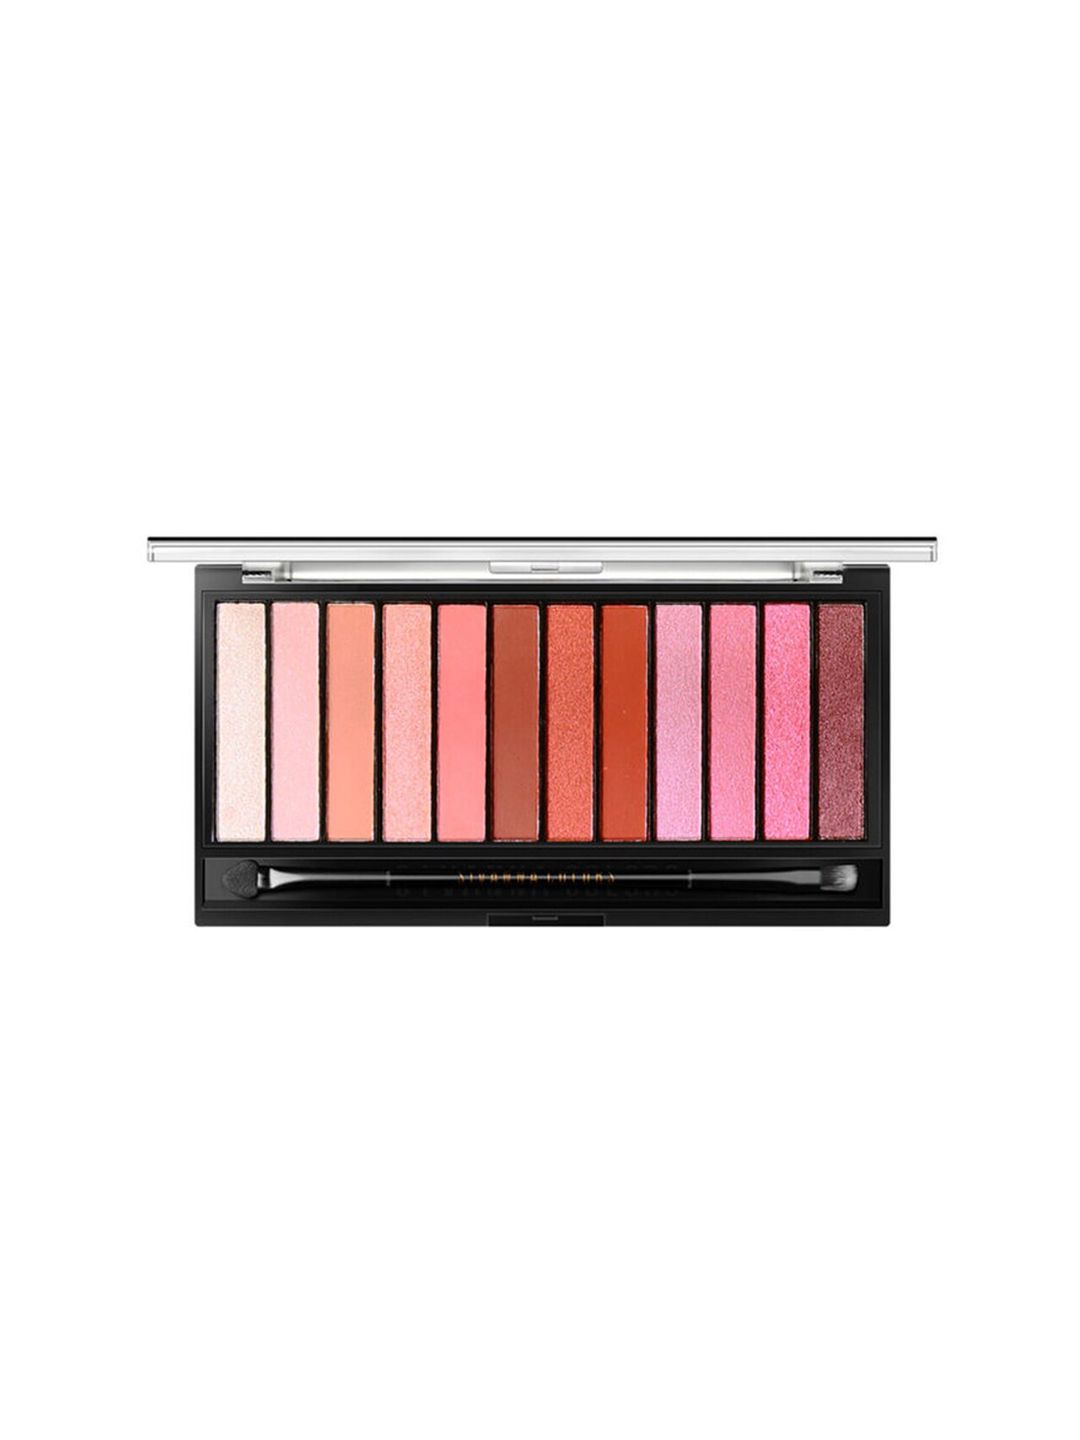 Sivanna Colors Make Up Studio Deluxe Eyeshadow Palette - HF202 01 Price in India